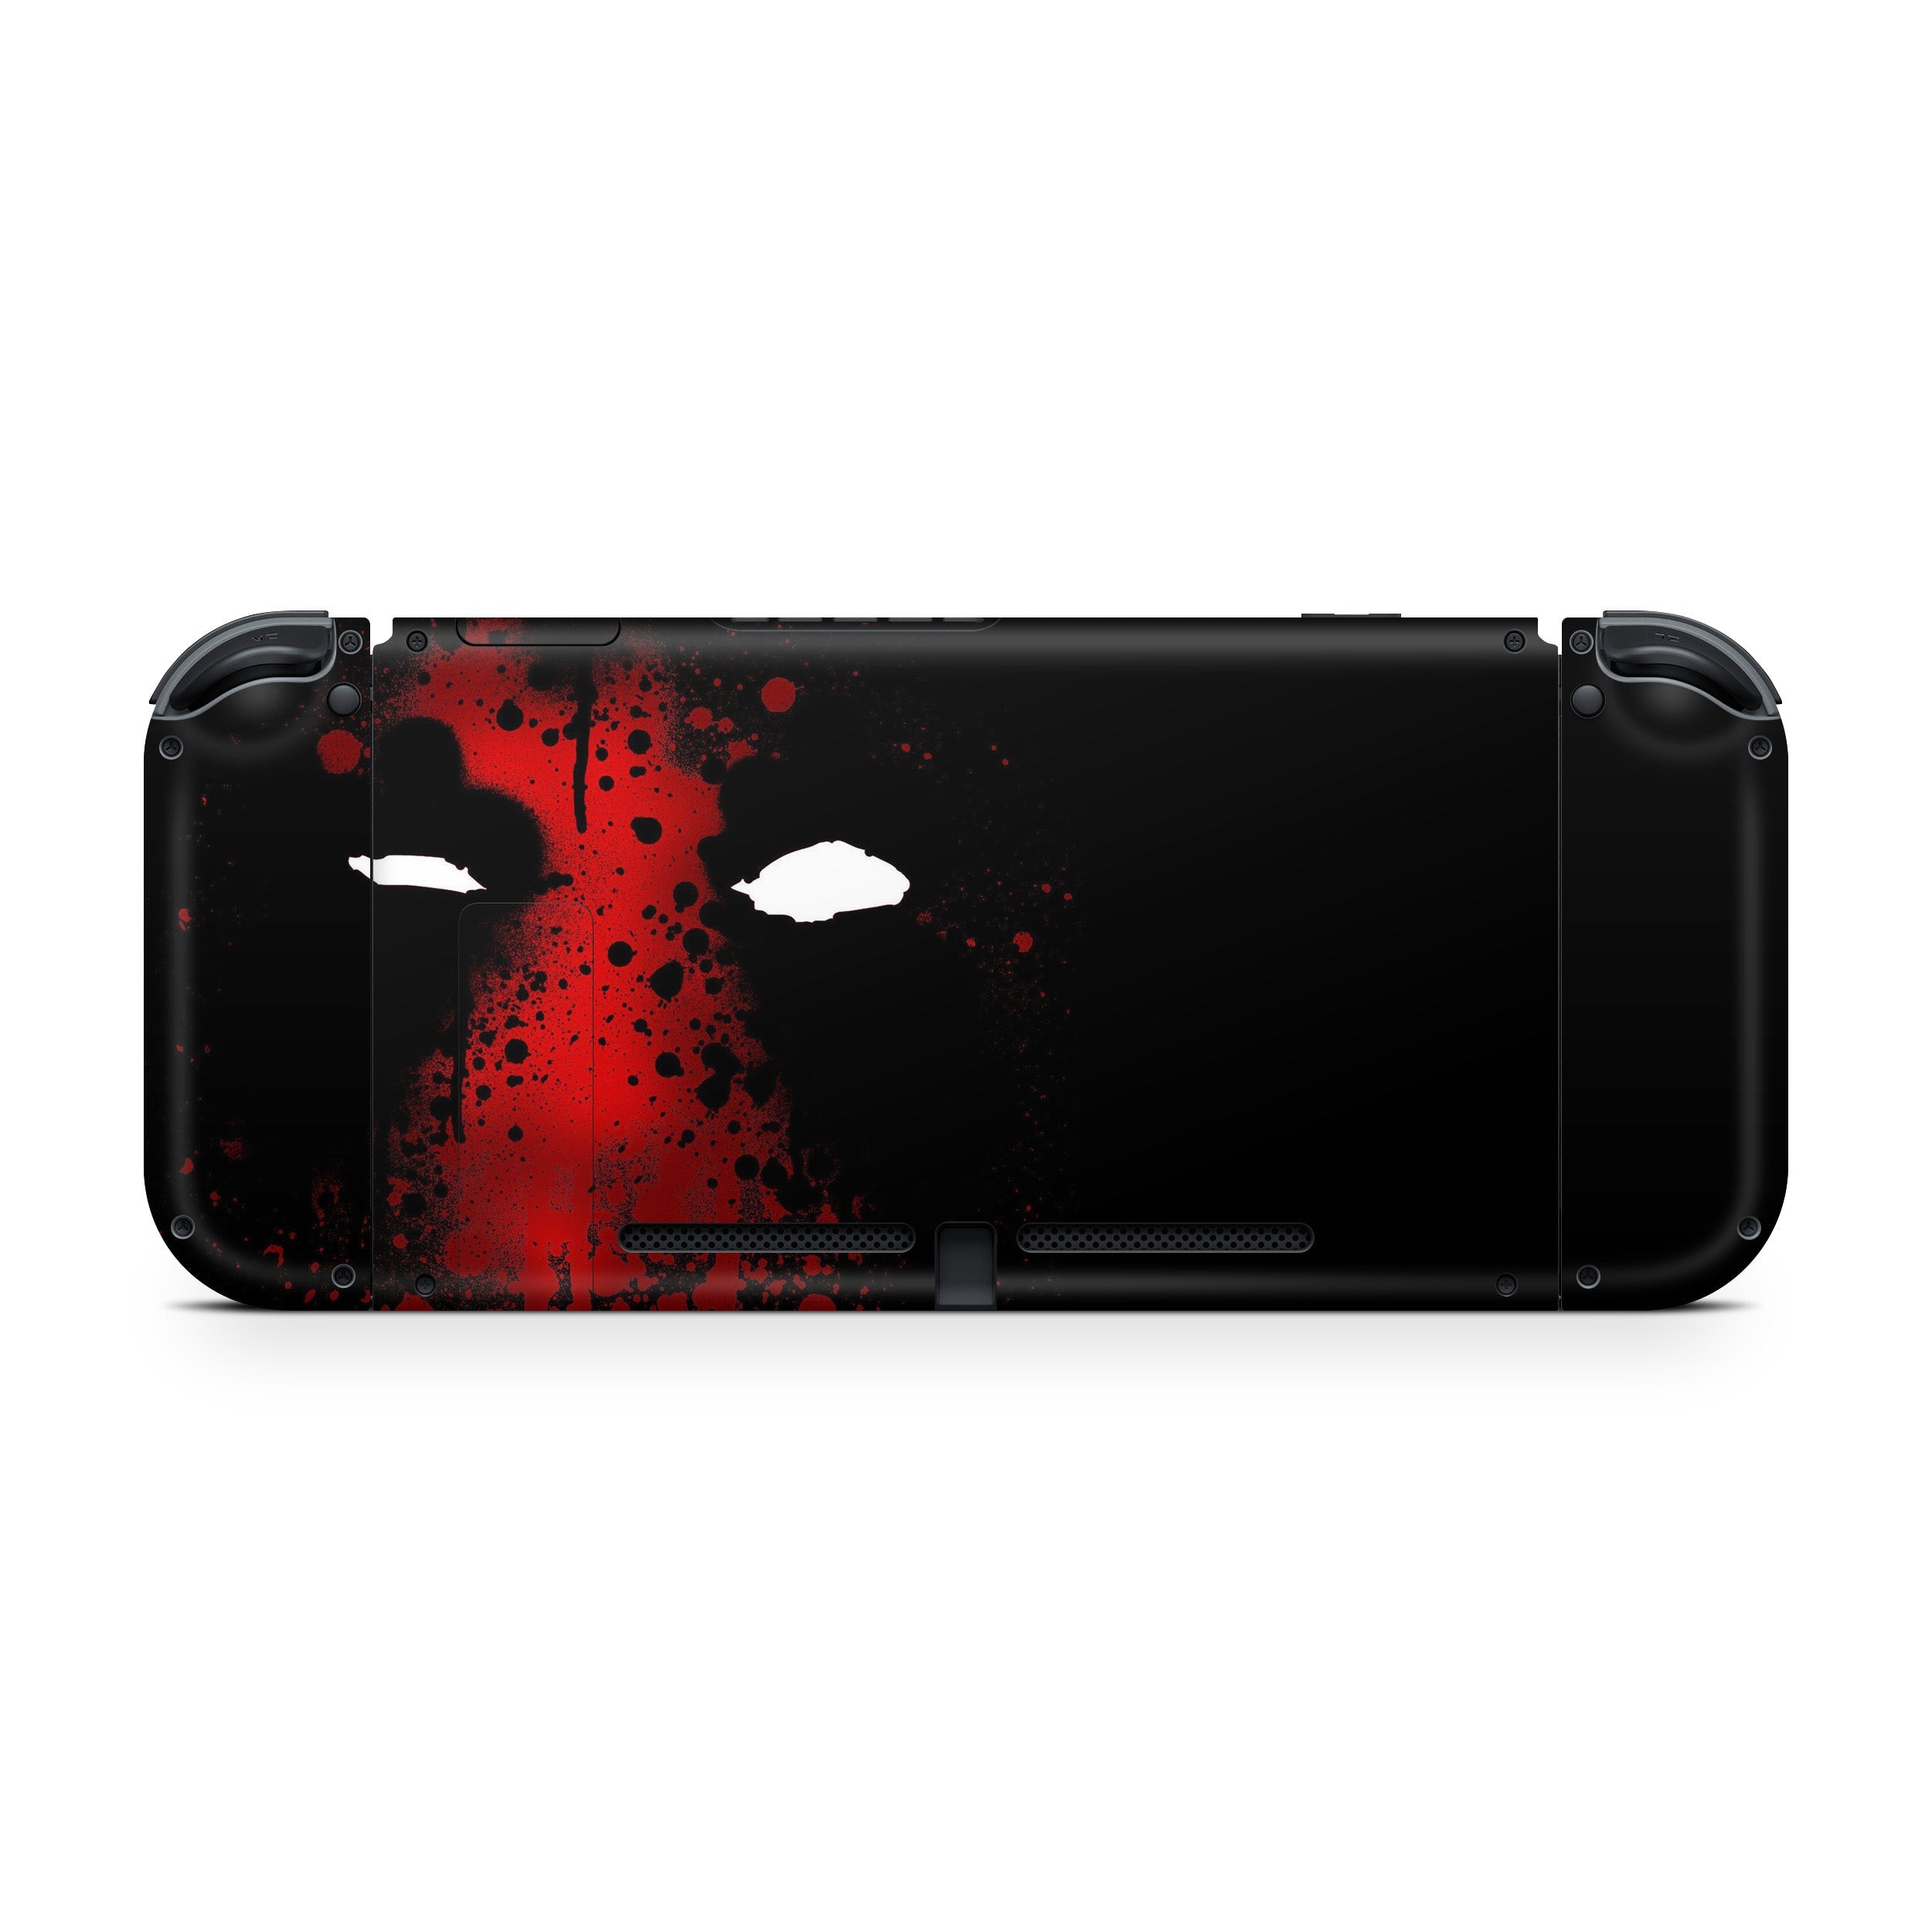 A video game skin featuring a Marvel Dead Pool design for the Nintendo Switch.